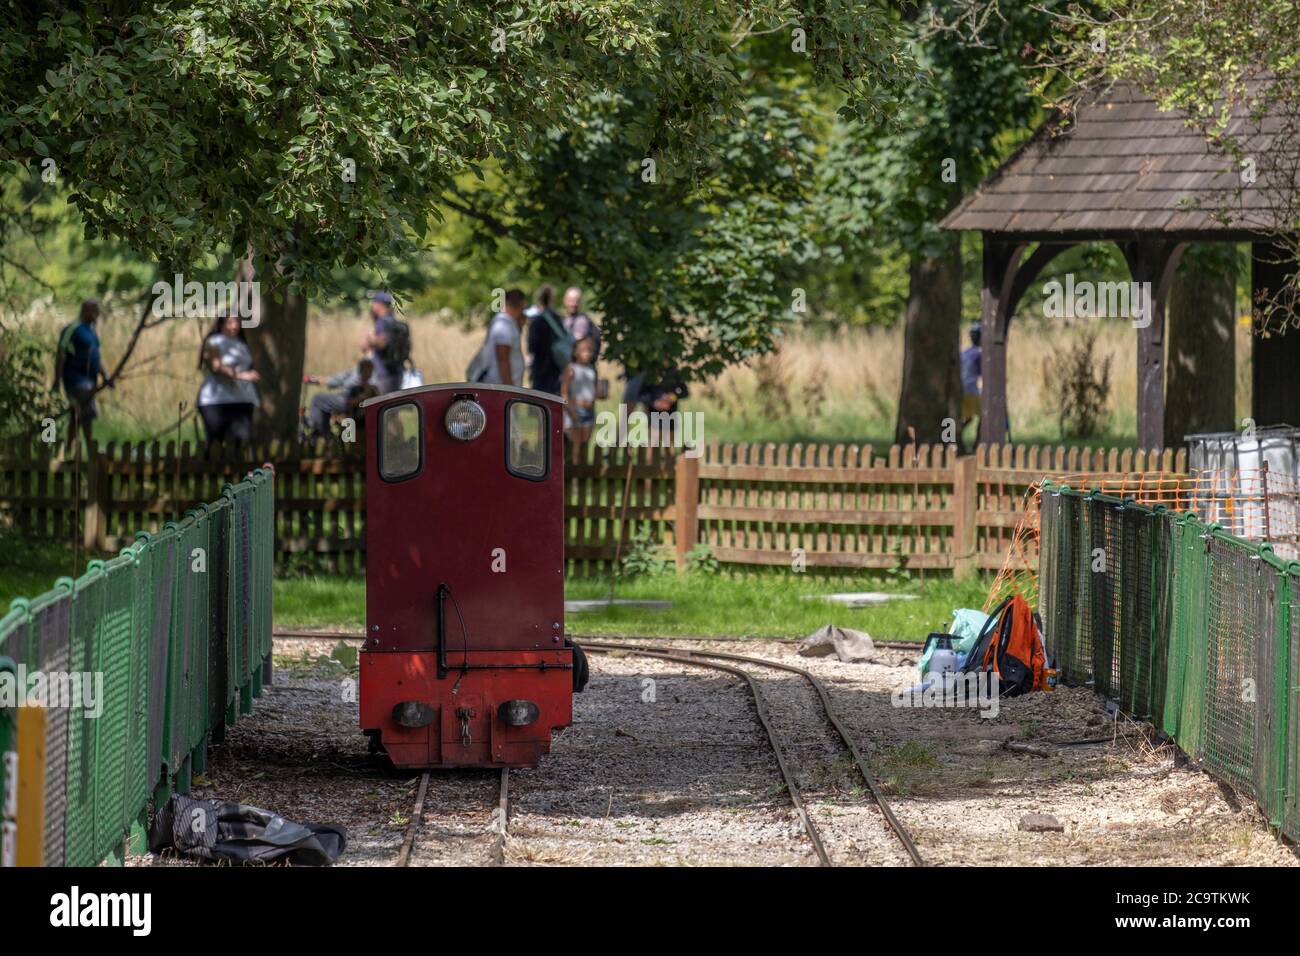 Watford, Hertfordshire, UK. 2 August 2020. Narrow gauge railway in Cassiobury Park, the largest public open space in Watford, attracts Sunday visitors Stock Photo